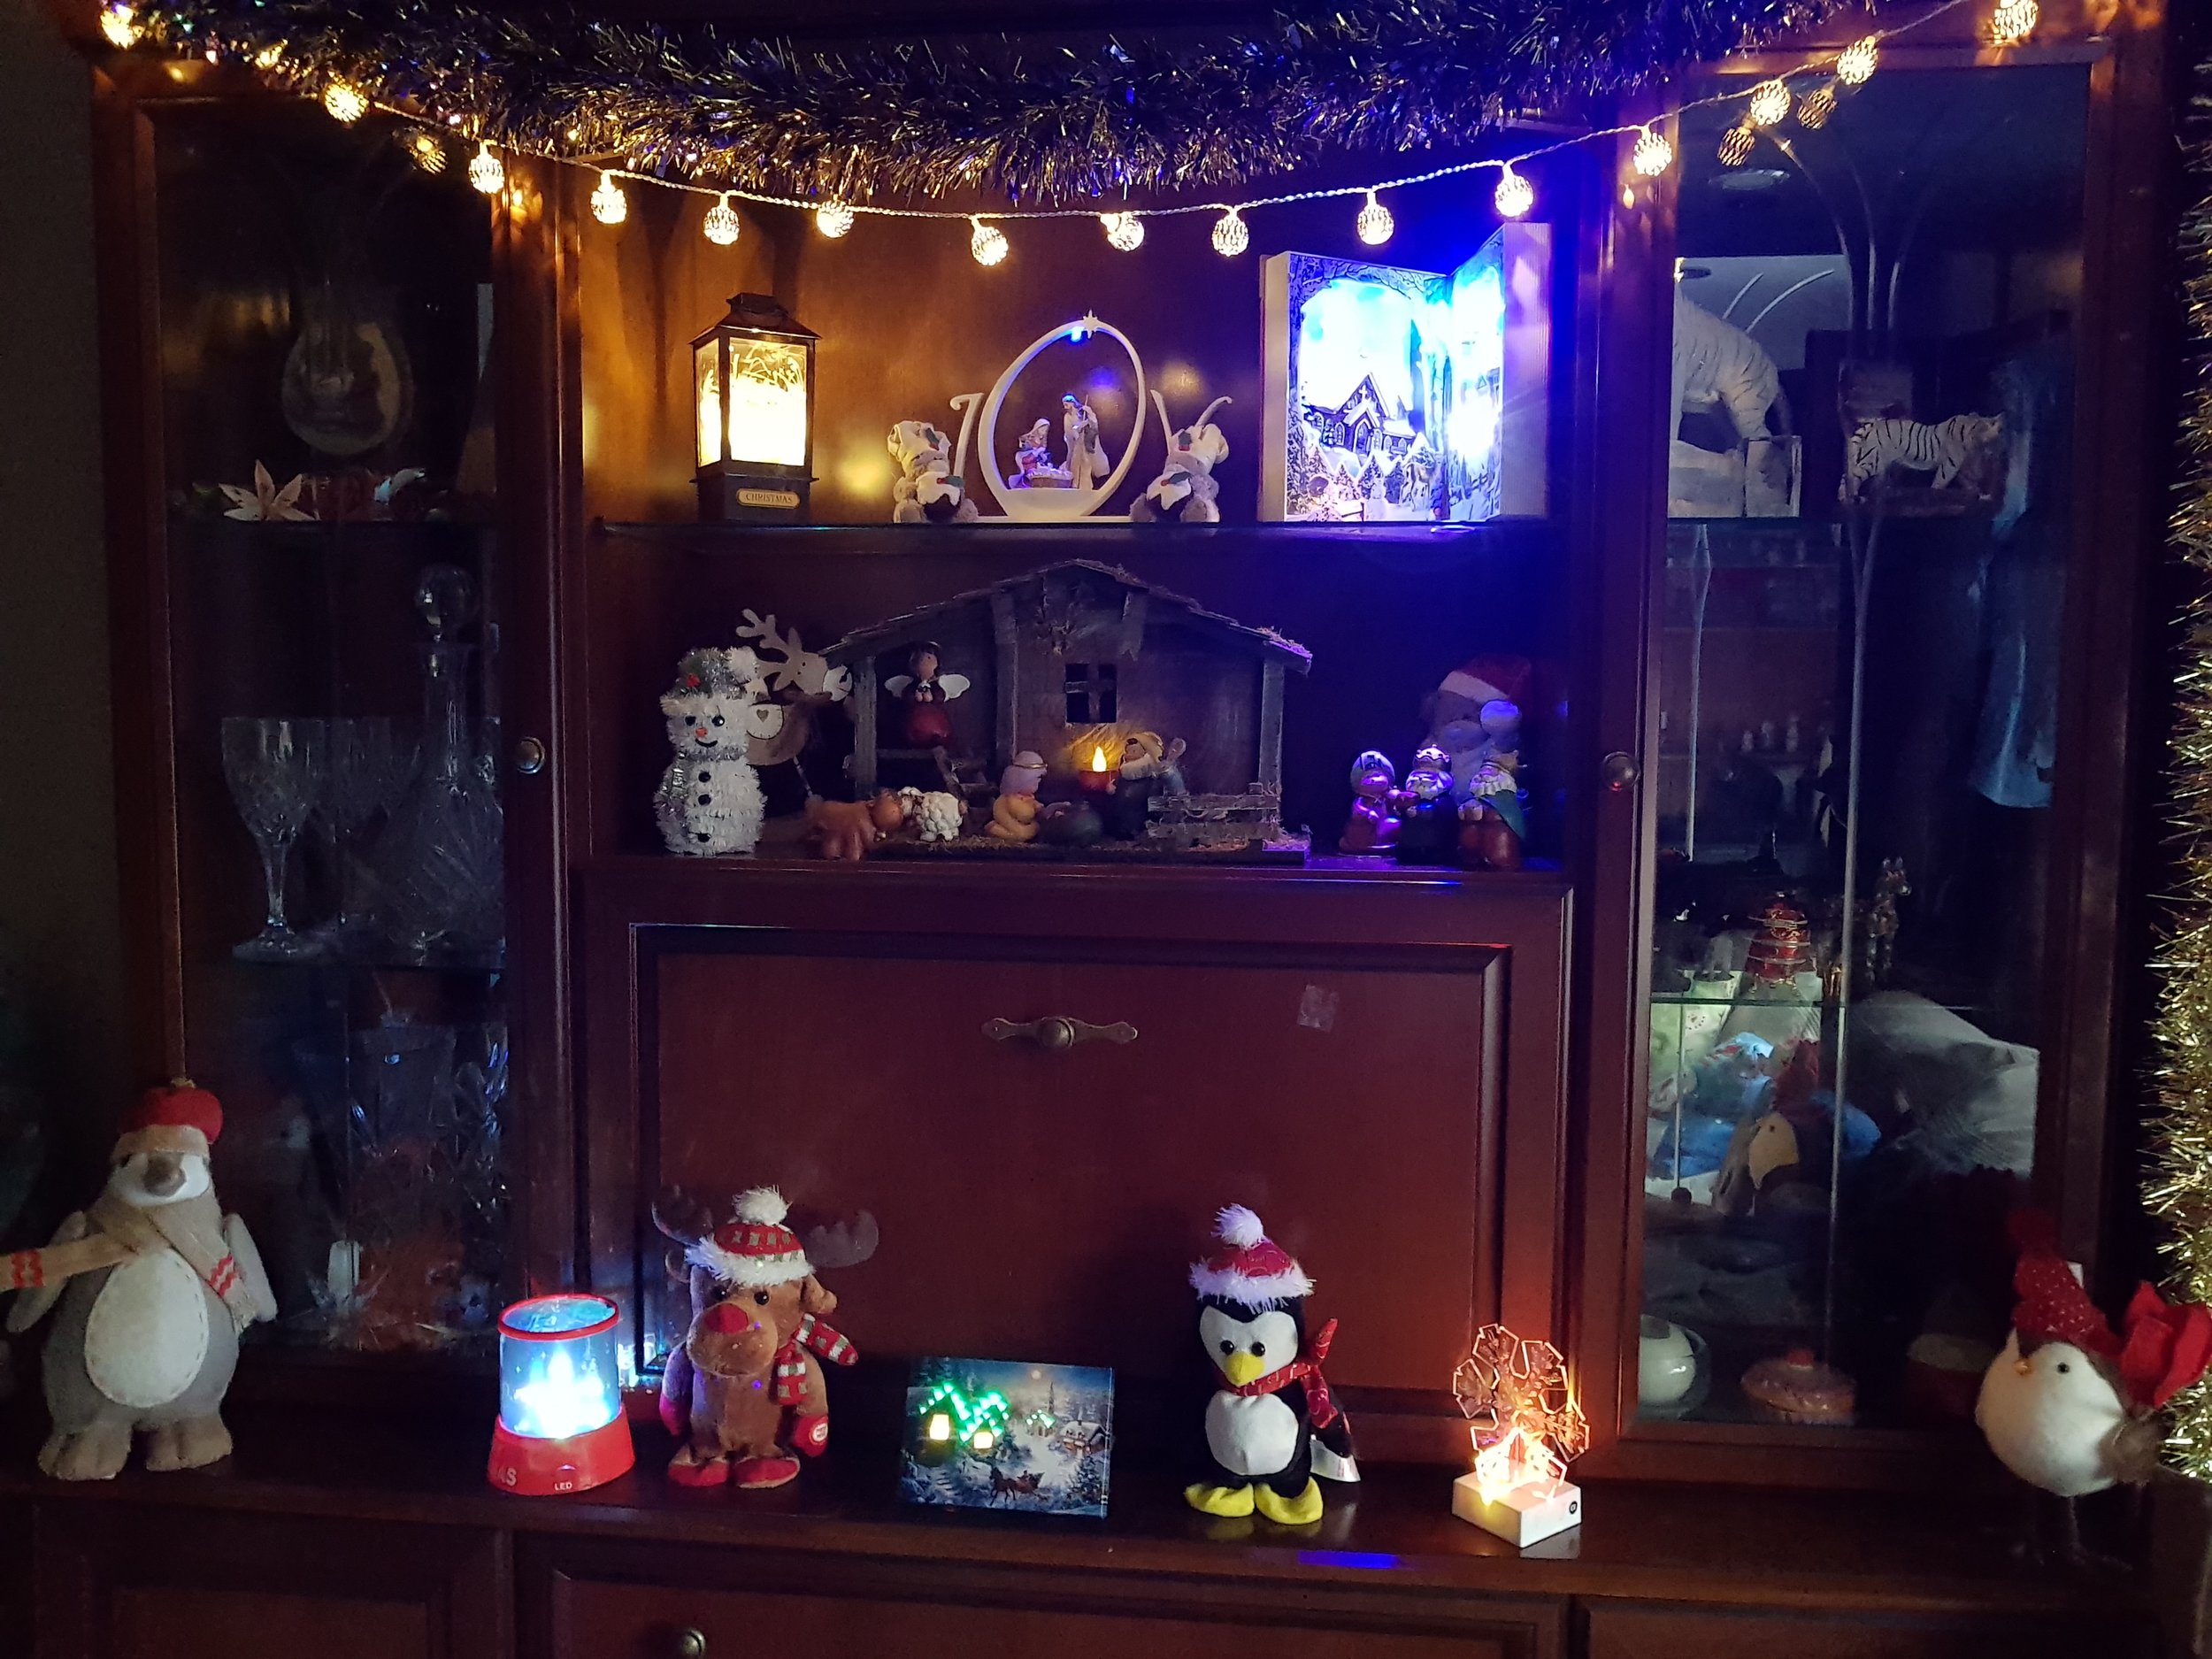 Sideboard full of Christmas decorations and lights